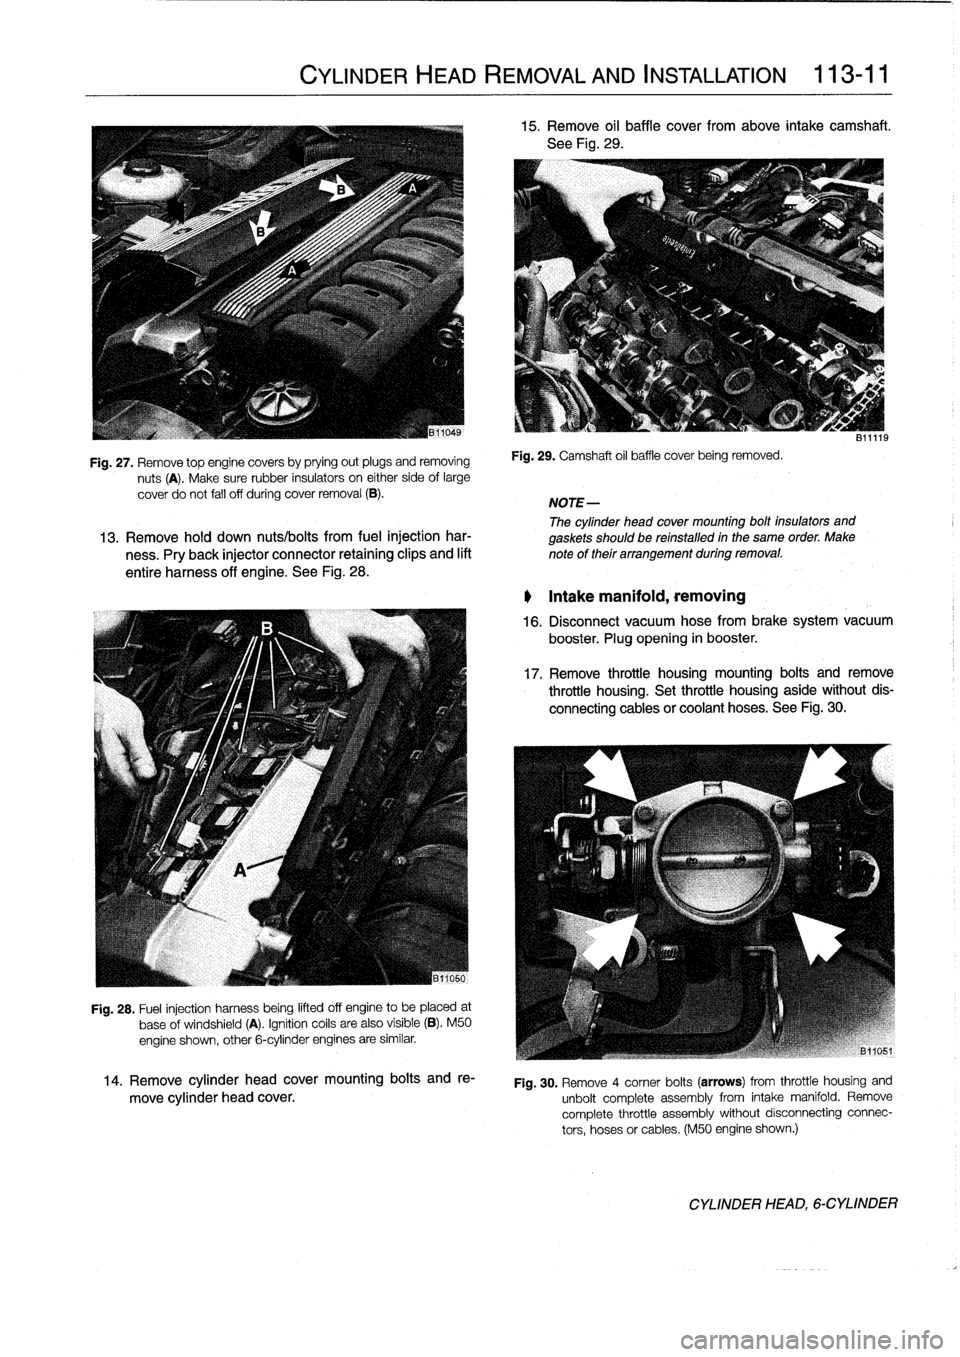 BMW M3 1993 E36 User Guide 
Fig
.
27
.
Remove
top
enginecovers
by
prying
out
plugs
and
removing

nuts
(A)
.
Make
sure
rubber
insulators
on
either
side
of
large

cover
do
not
fall
off
during
cover
removal
(B)
.

Fig
.
28
.
Fuel
